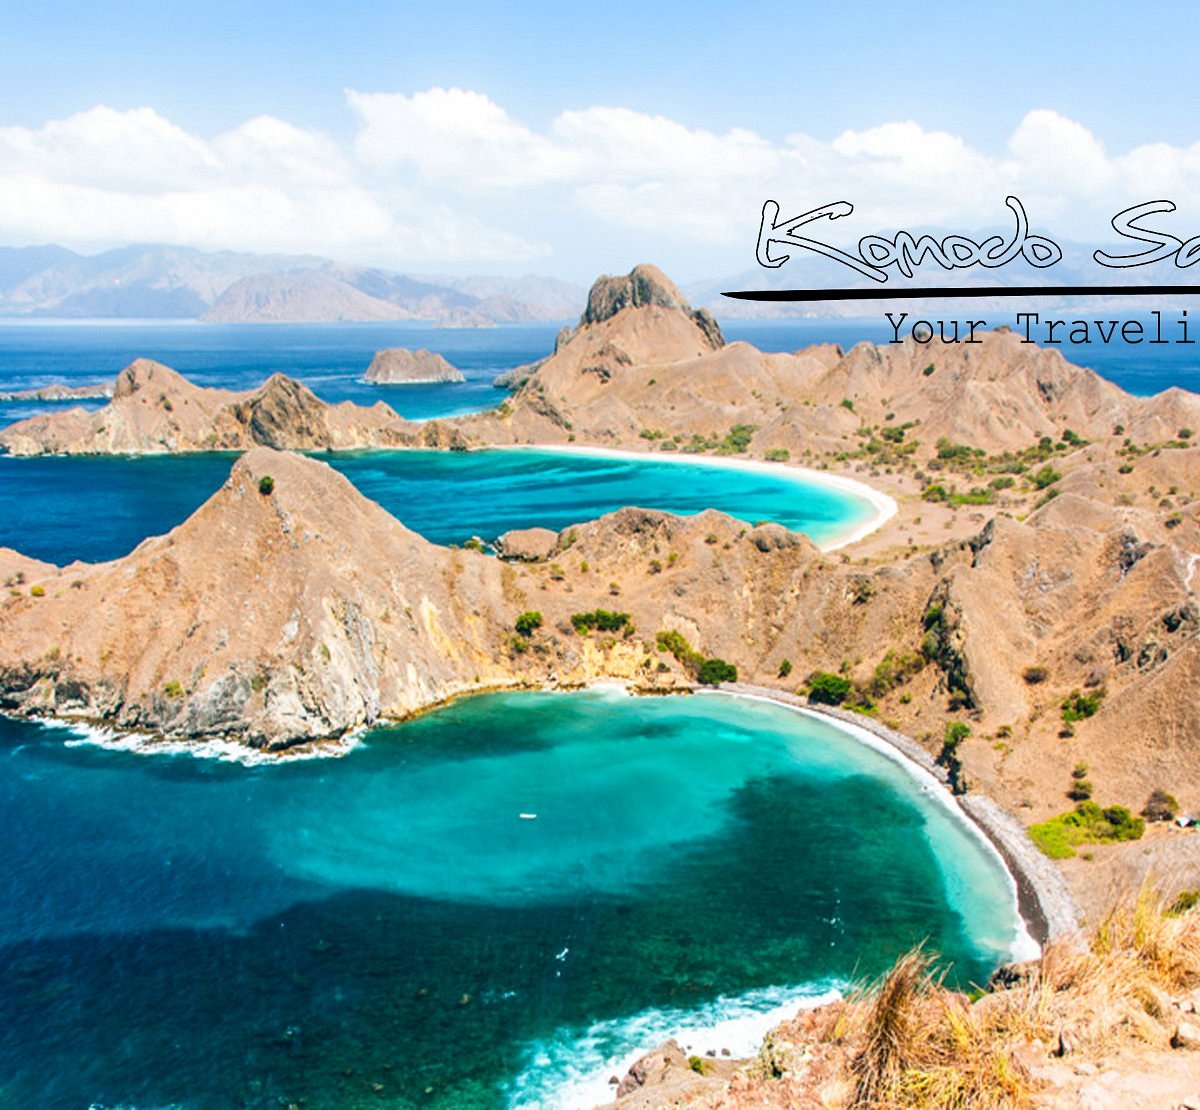 Komodo Sailing Trip (Labuan Bajo) - All You Need to Know BEFORE You Go